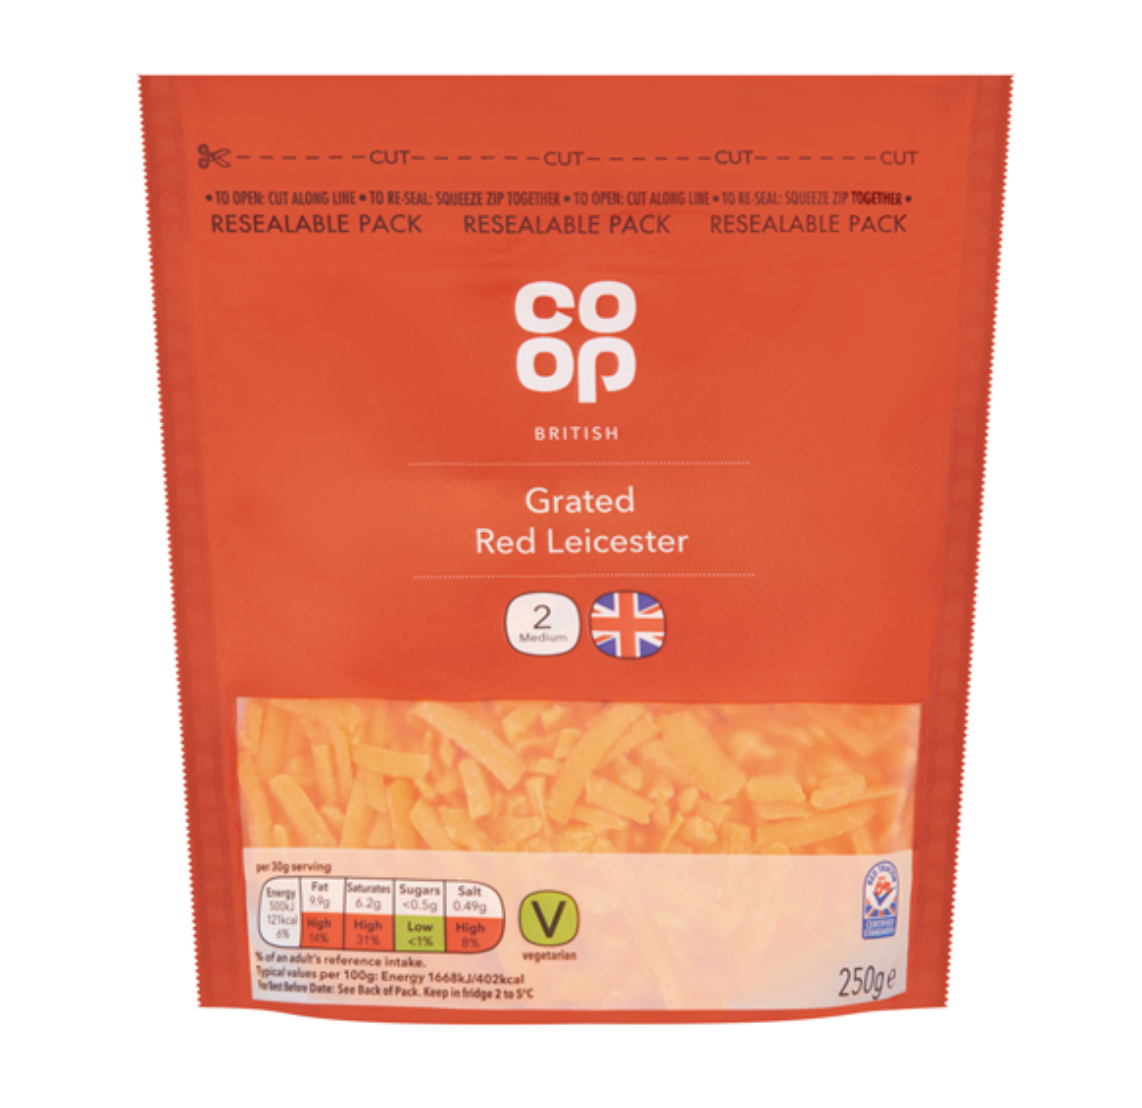 Co-op British Red Leicester Grated 250g